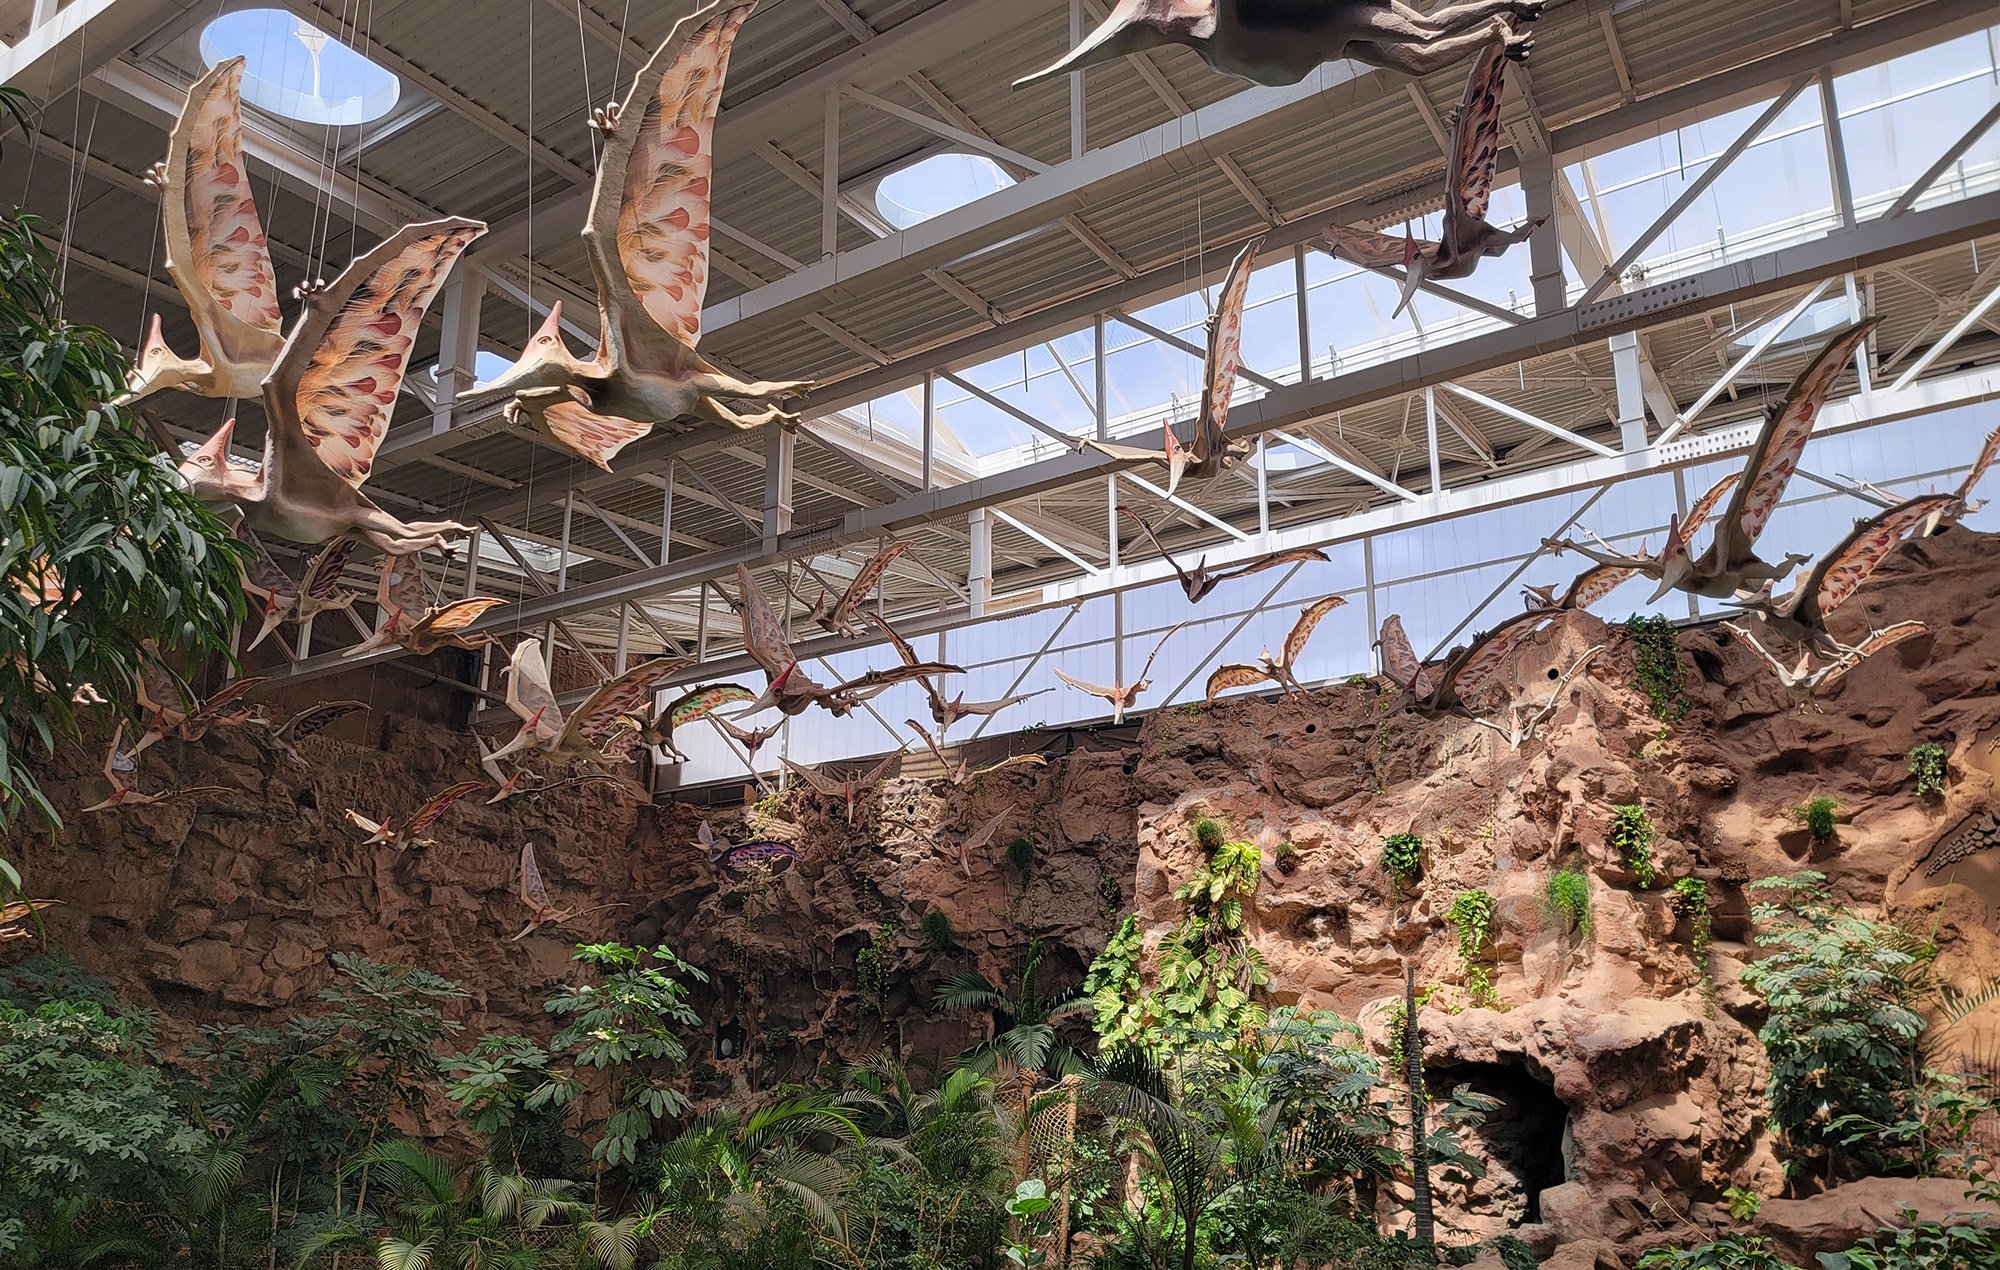 First section is a jungle with hundreds of pterosaurs hanging from the ceiling. Starts off real strong! 